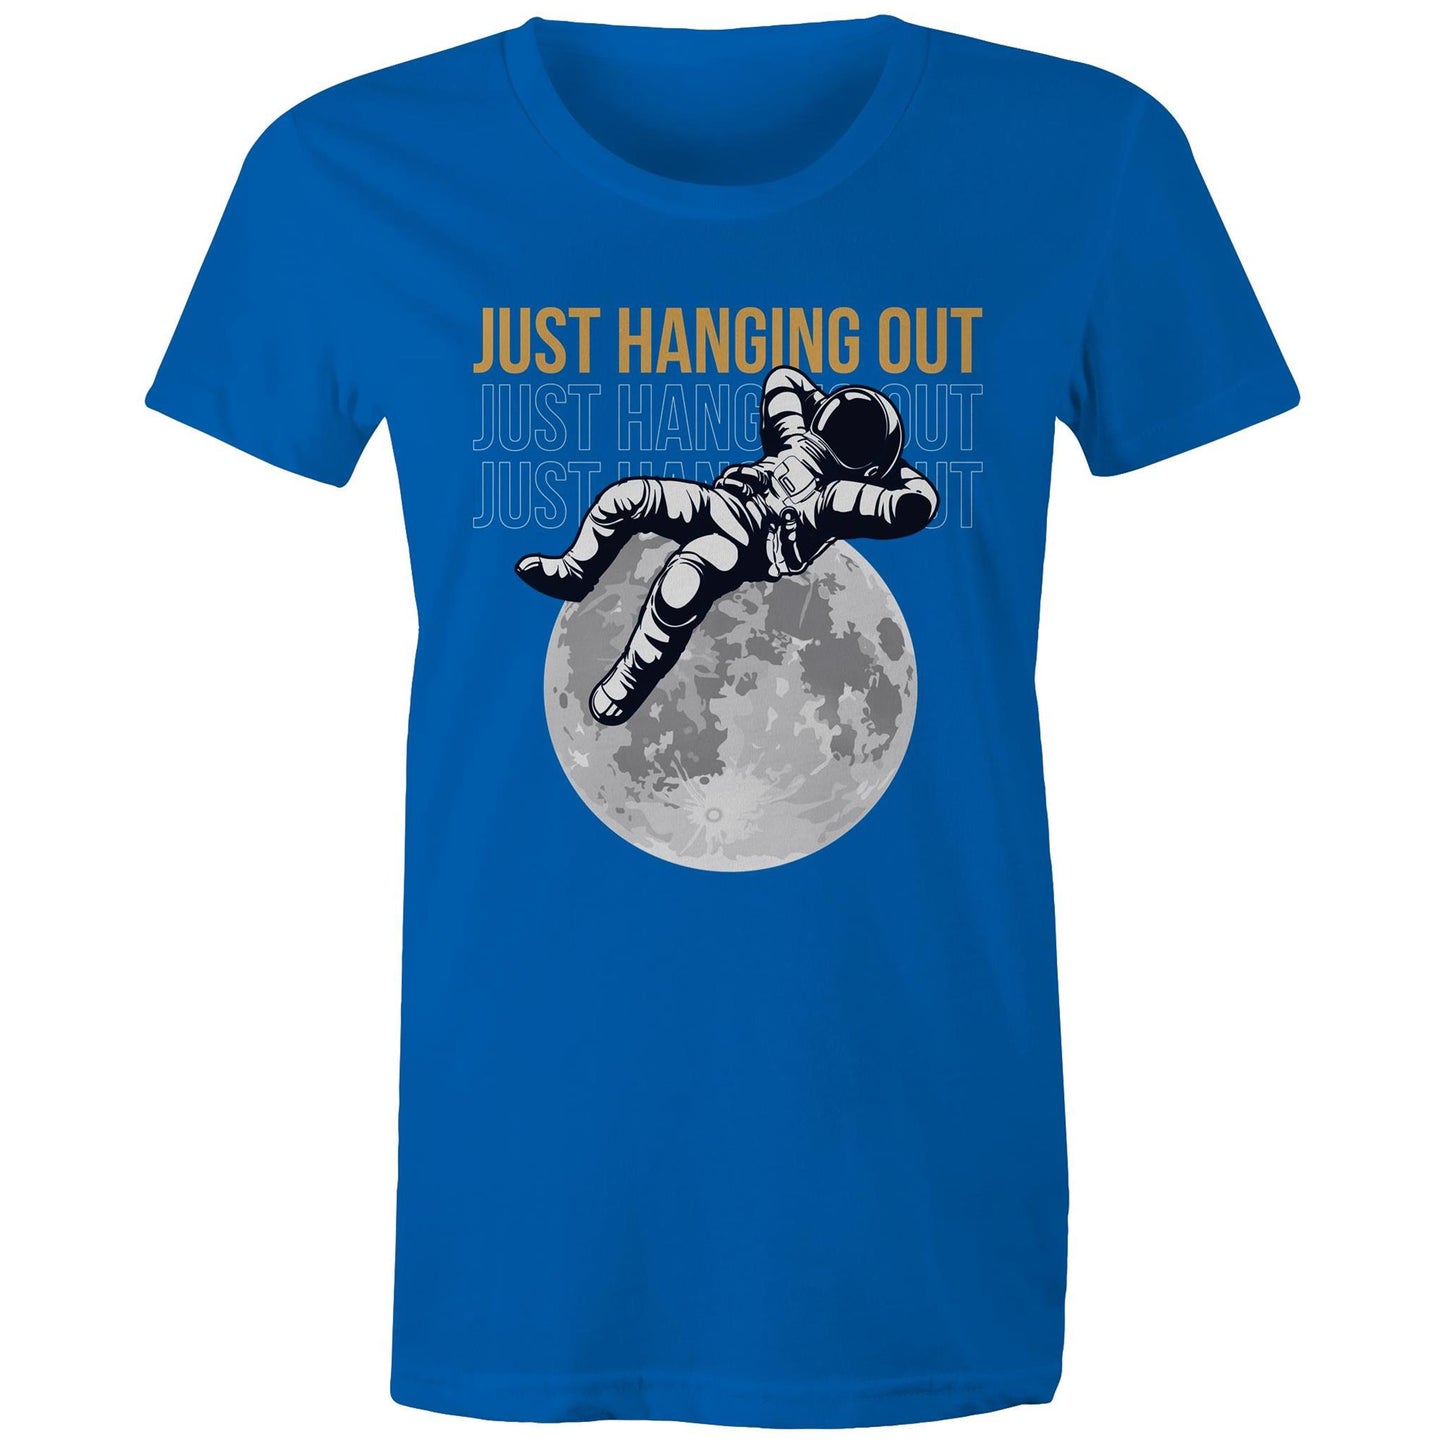 Just Hanging Out - Womens T-shirt Bright Royal Womens T-shirt Space